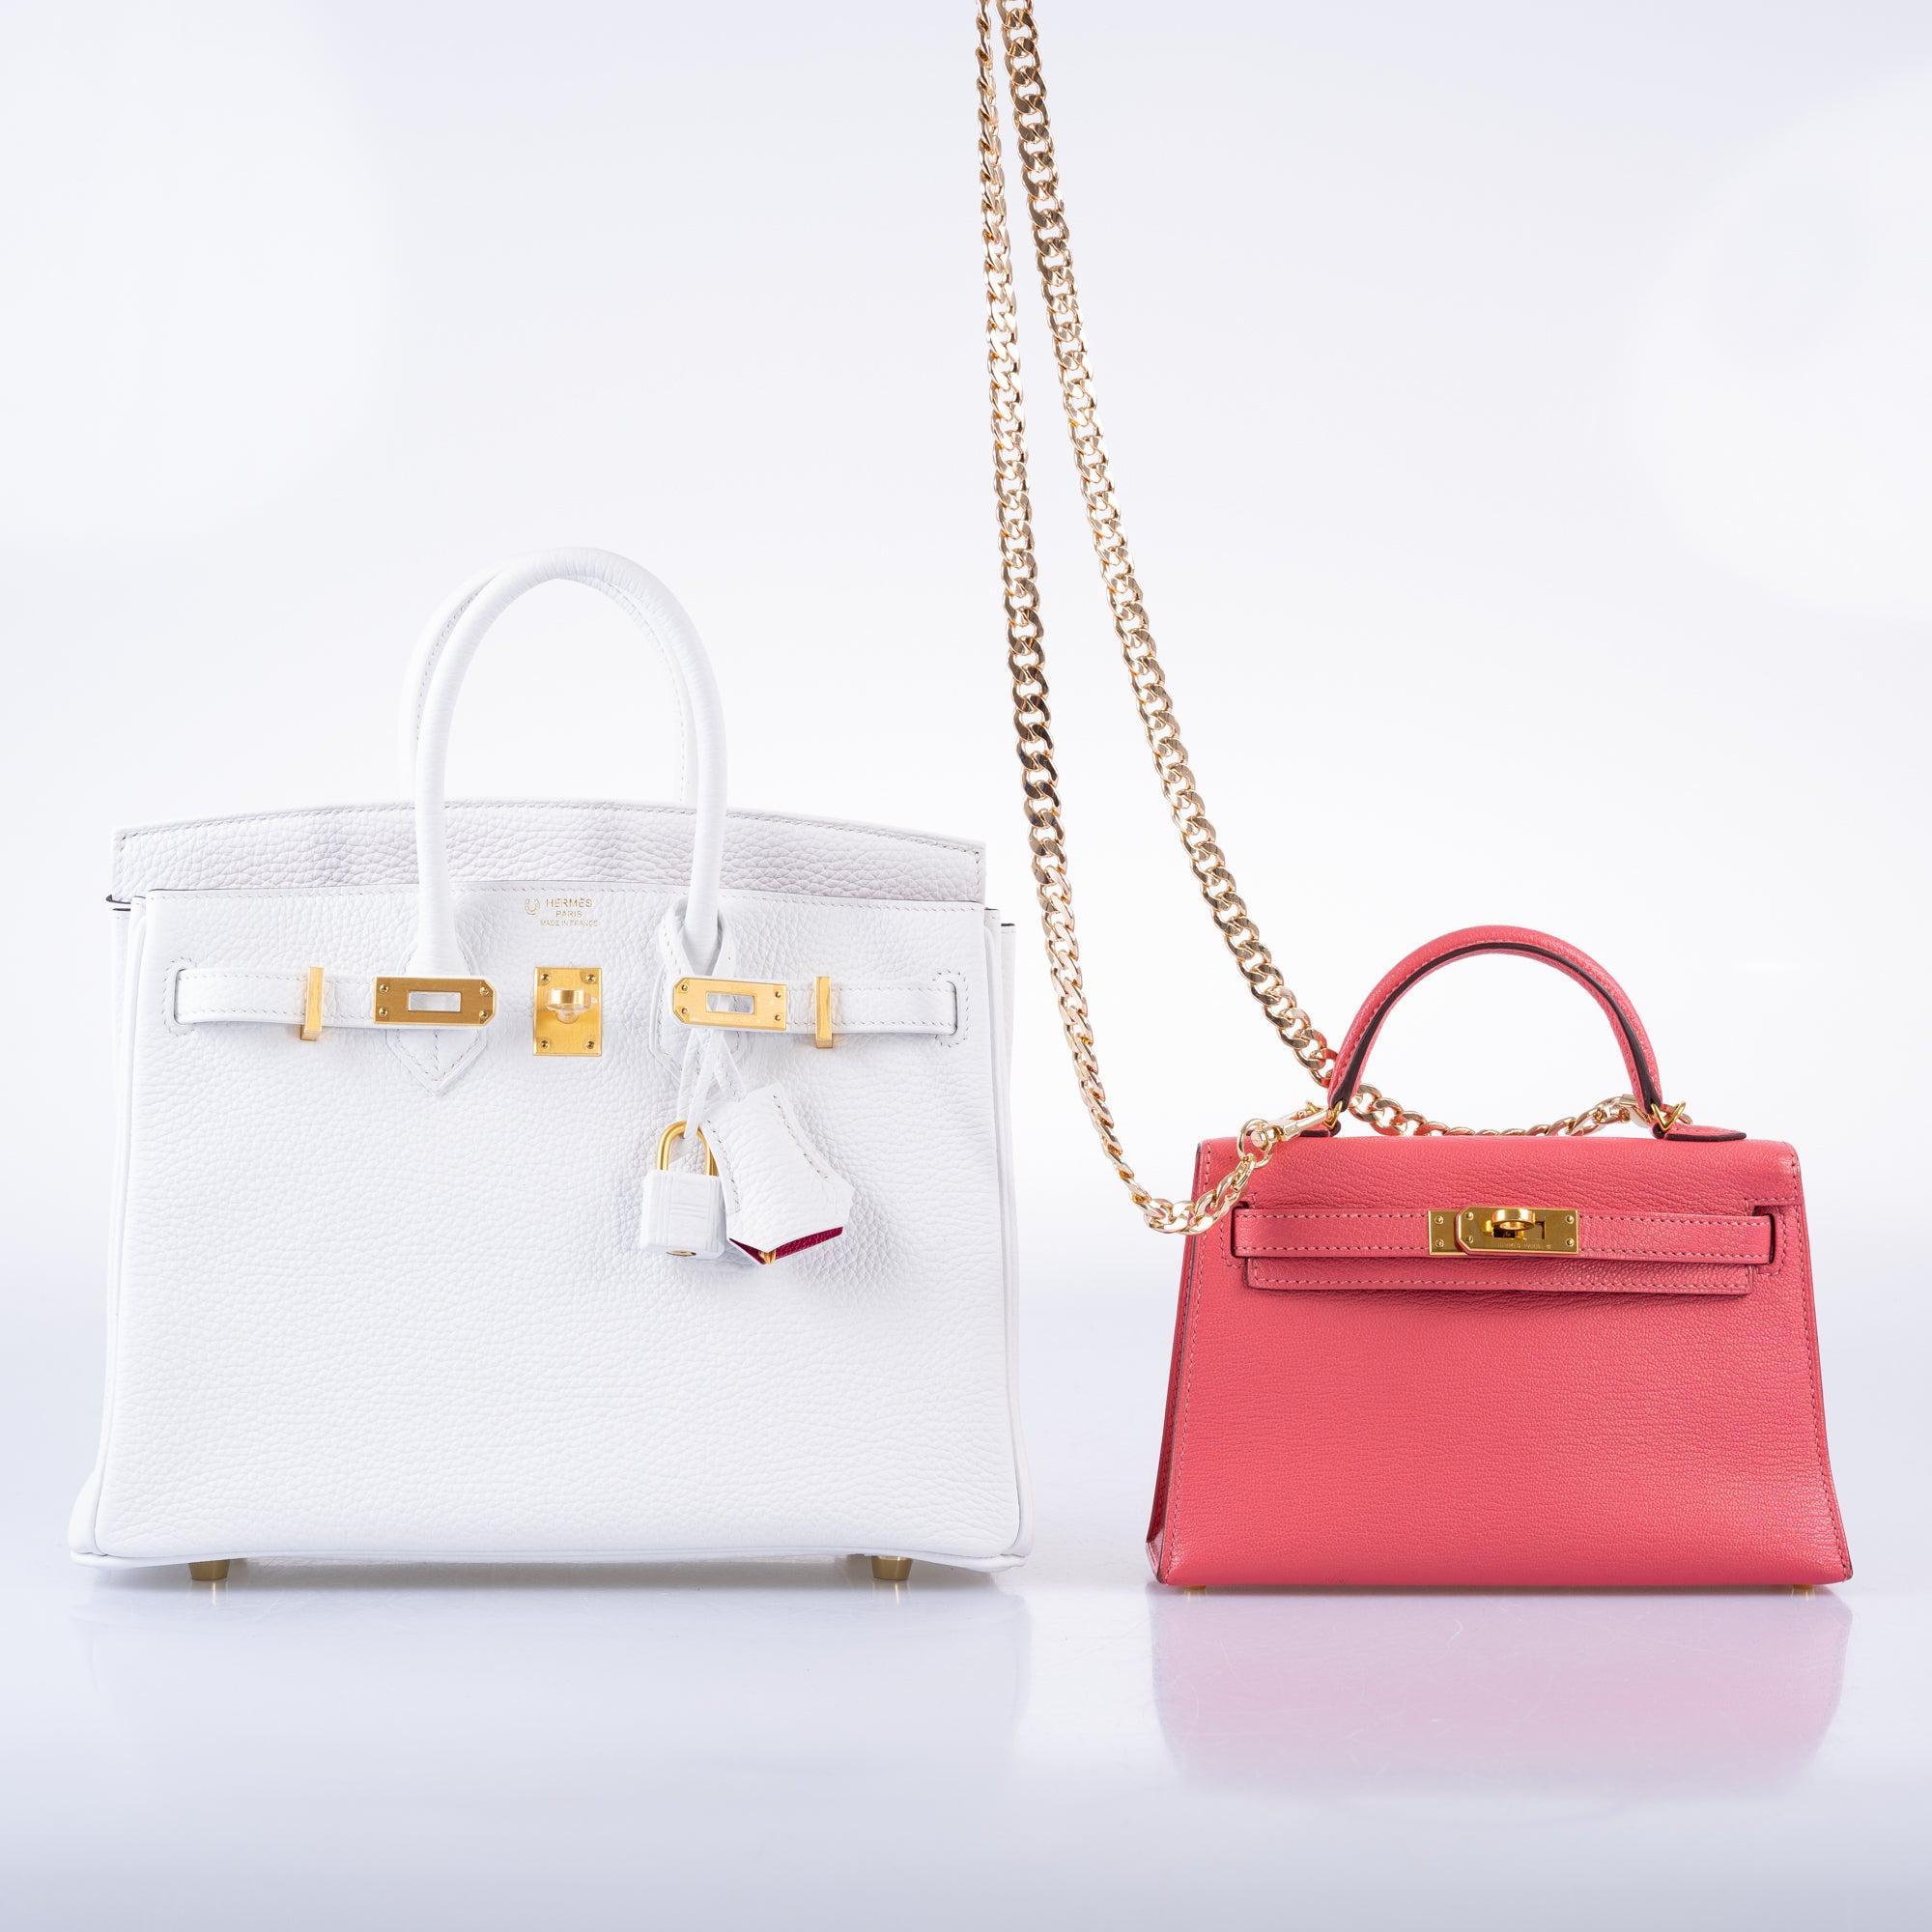 Hermès HSS Birkin 25 White Togo and Rose Pourpre Interior with Brushed Gold Hardware - 2021, Z